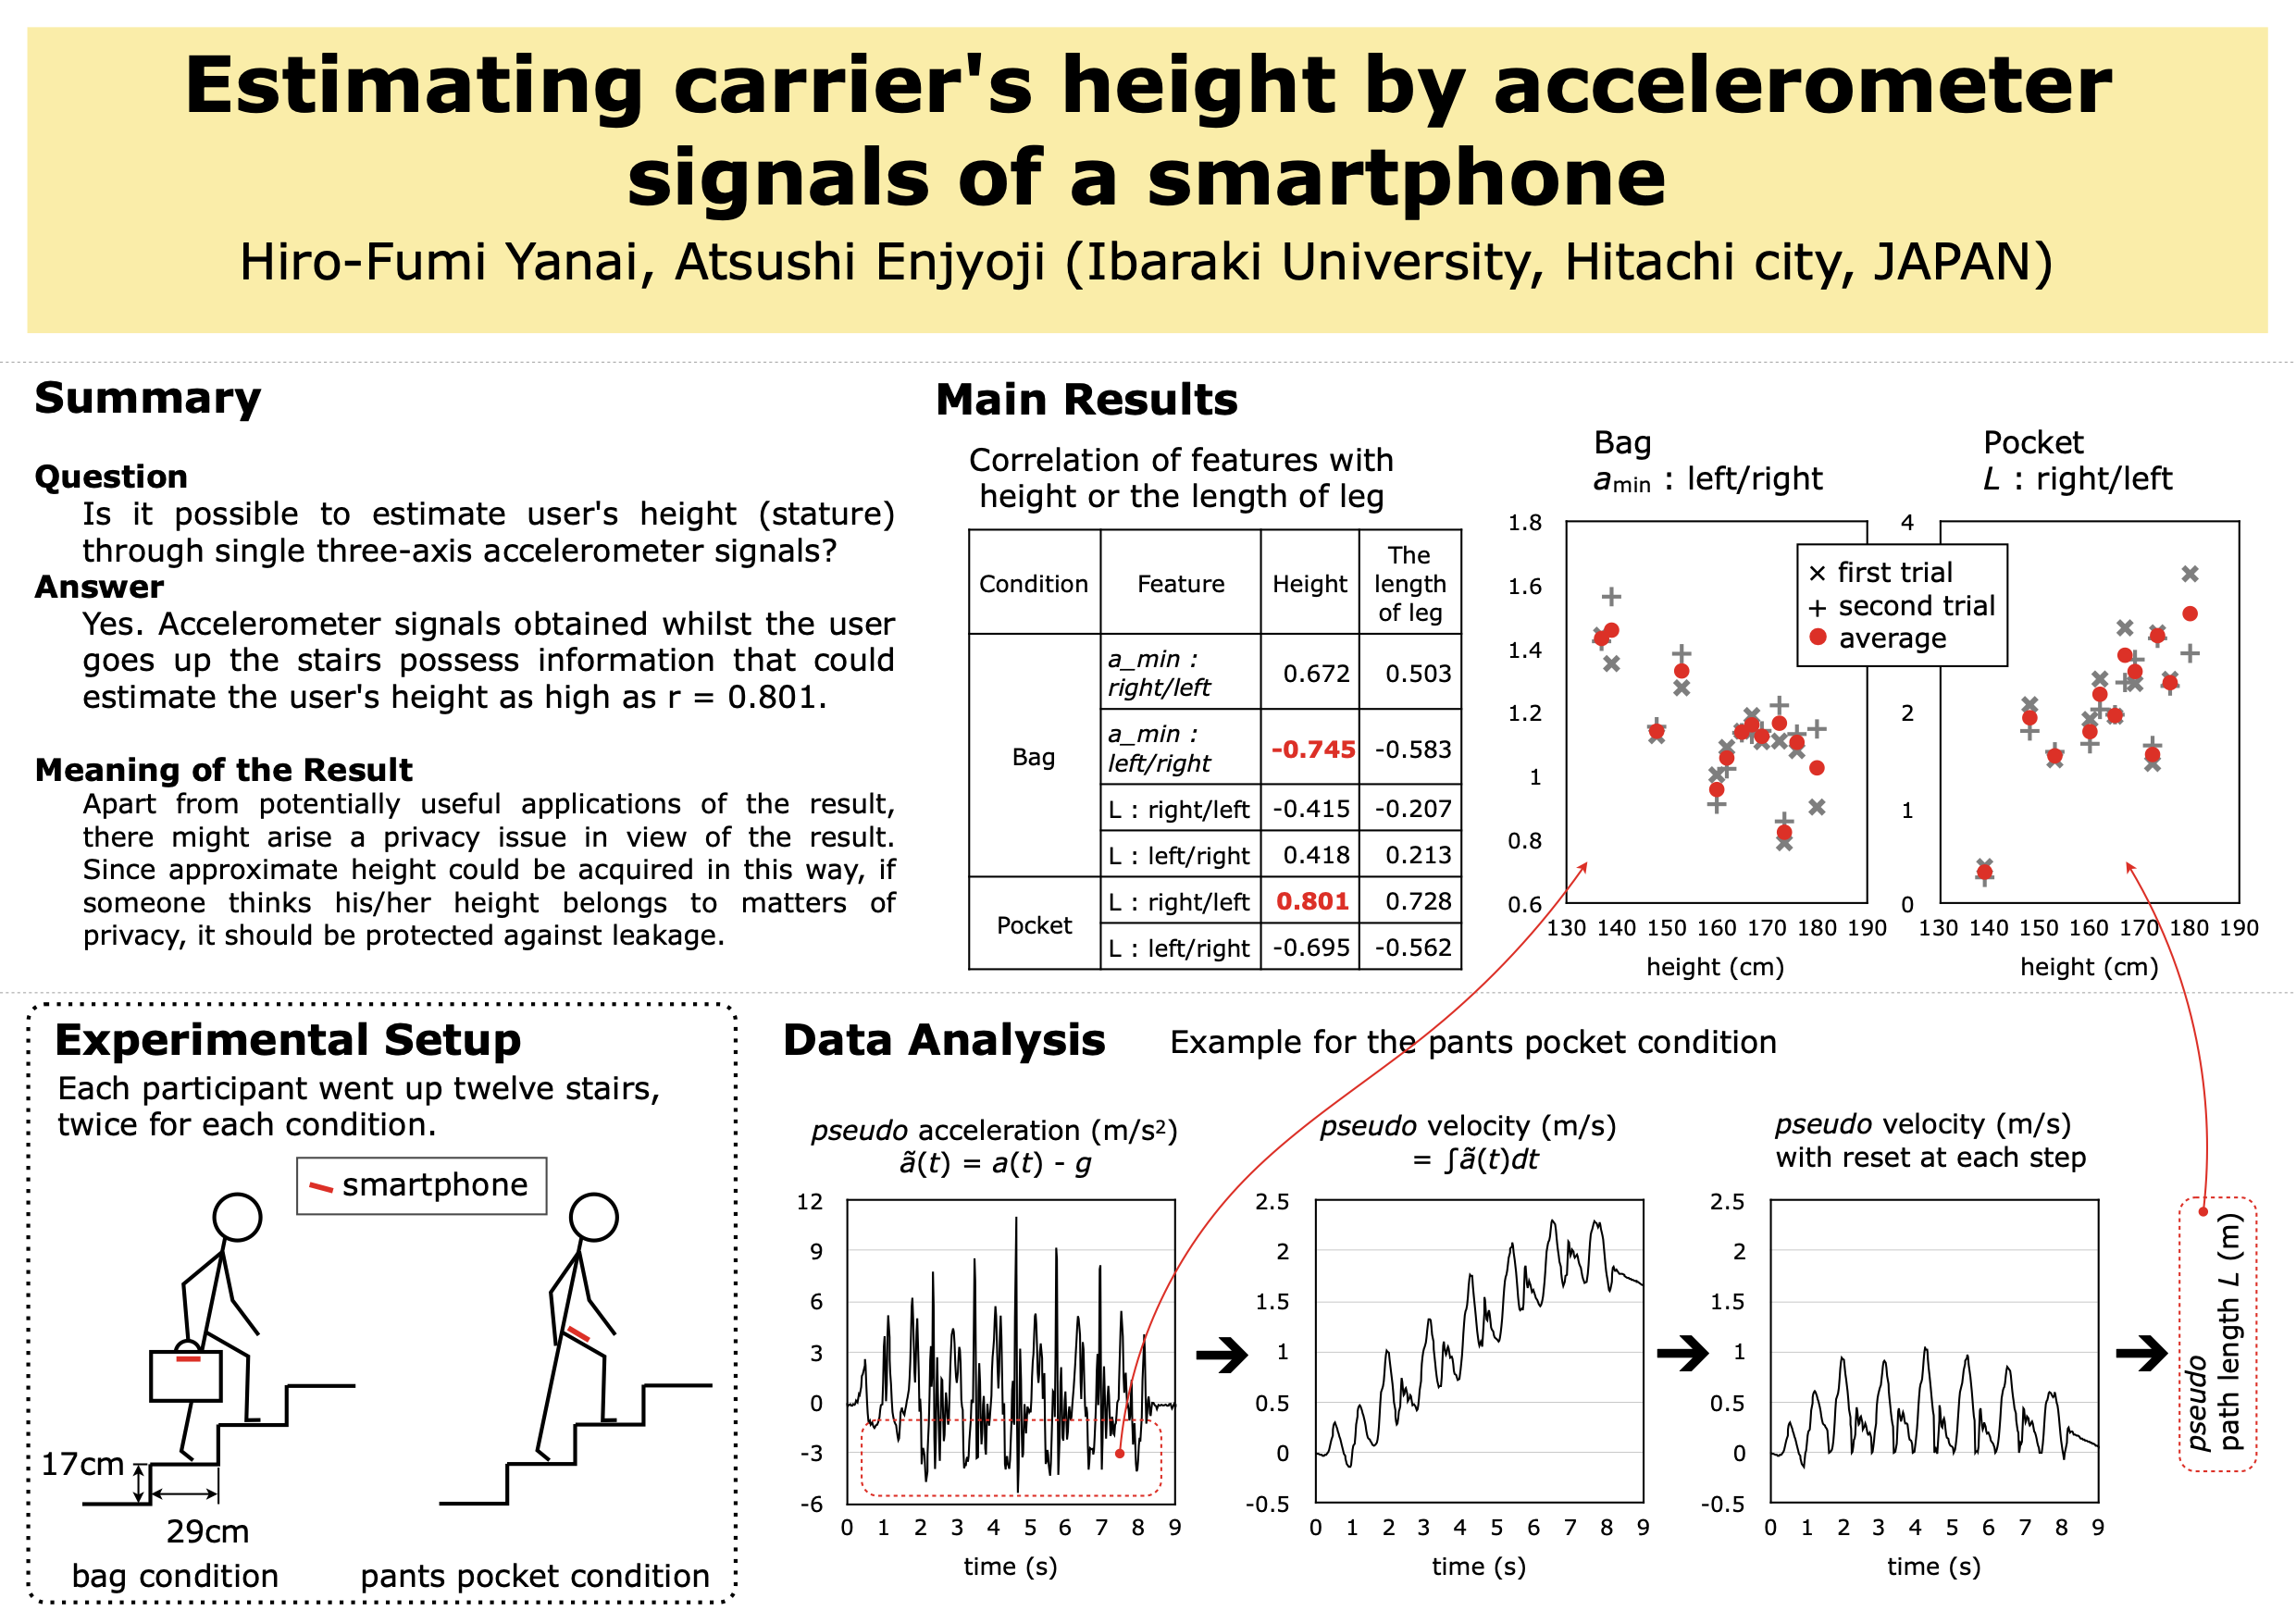 Estimating carrier's height by accelerometer signals of a smartphone（スマートフォンに内蔵された加速度センサー信号を利用してユーザーの身長を推定する）